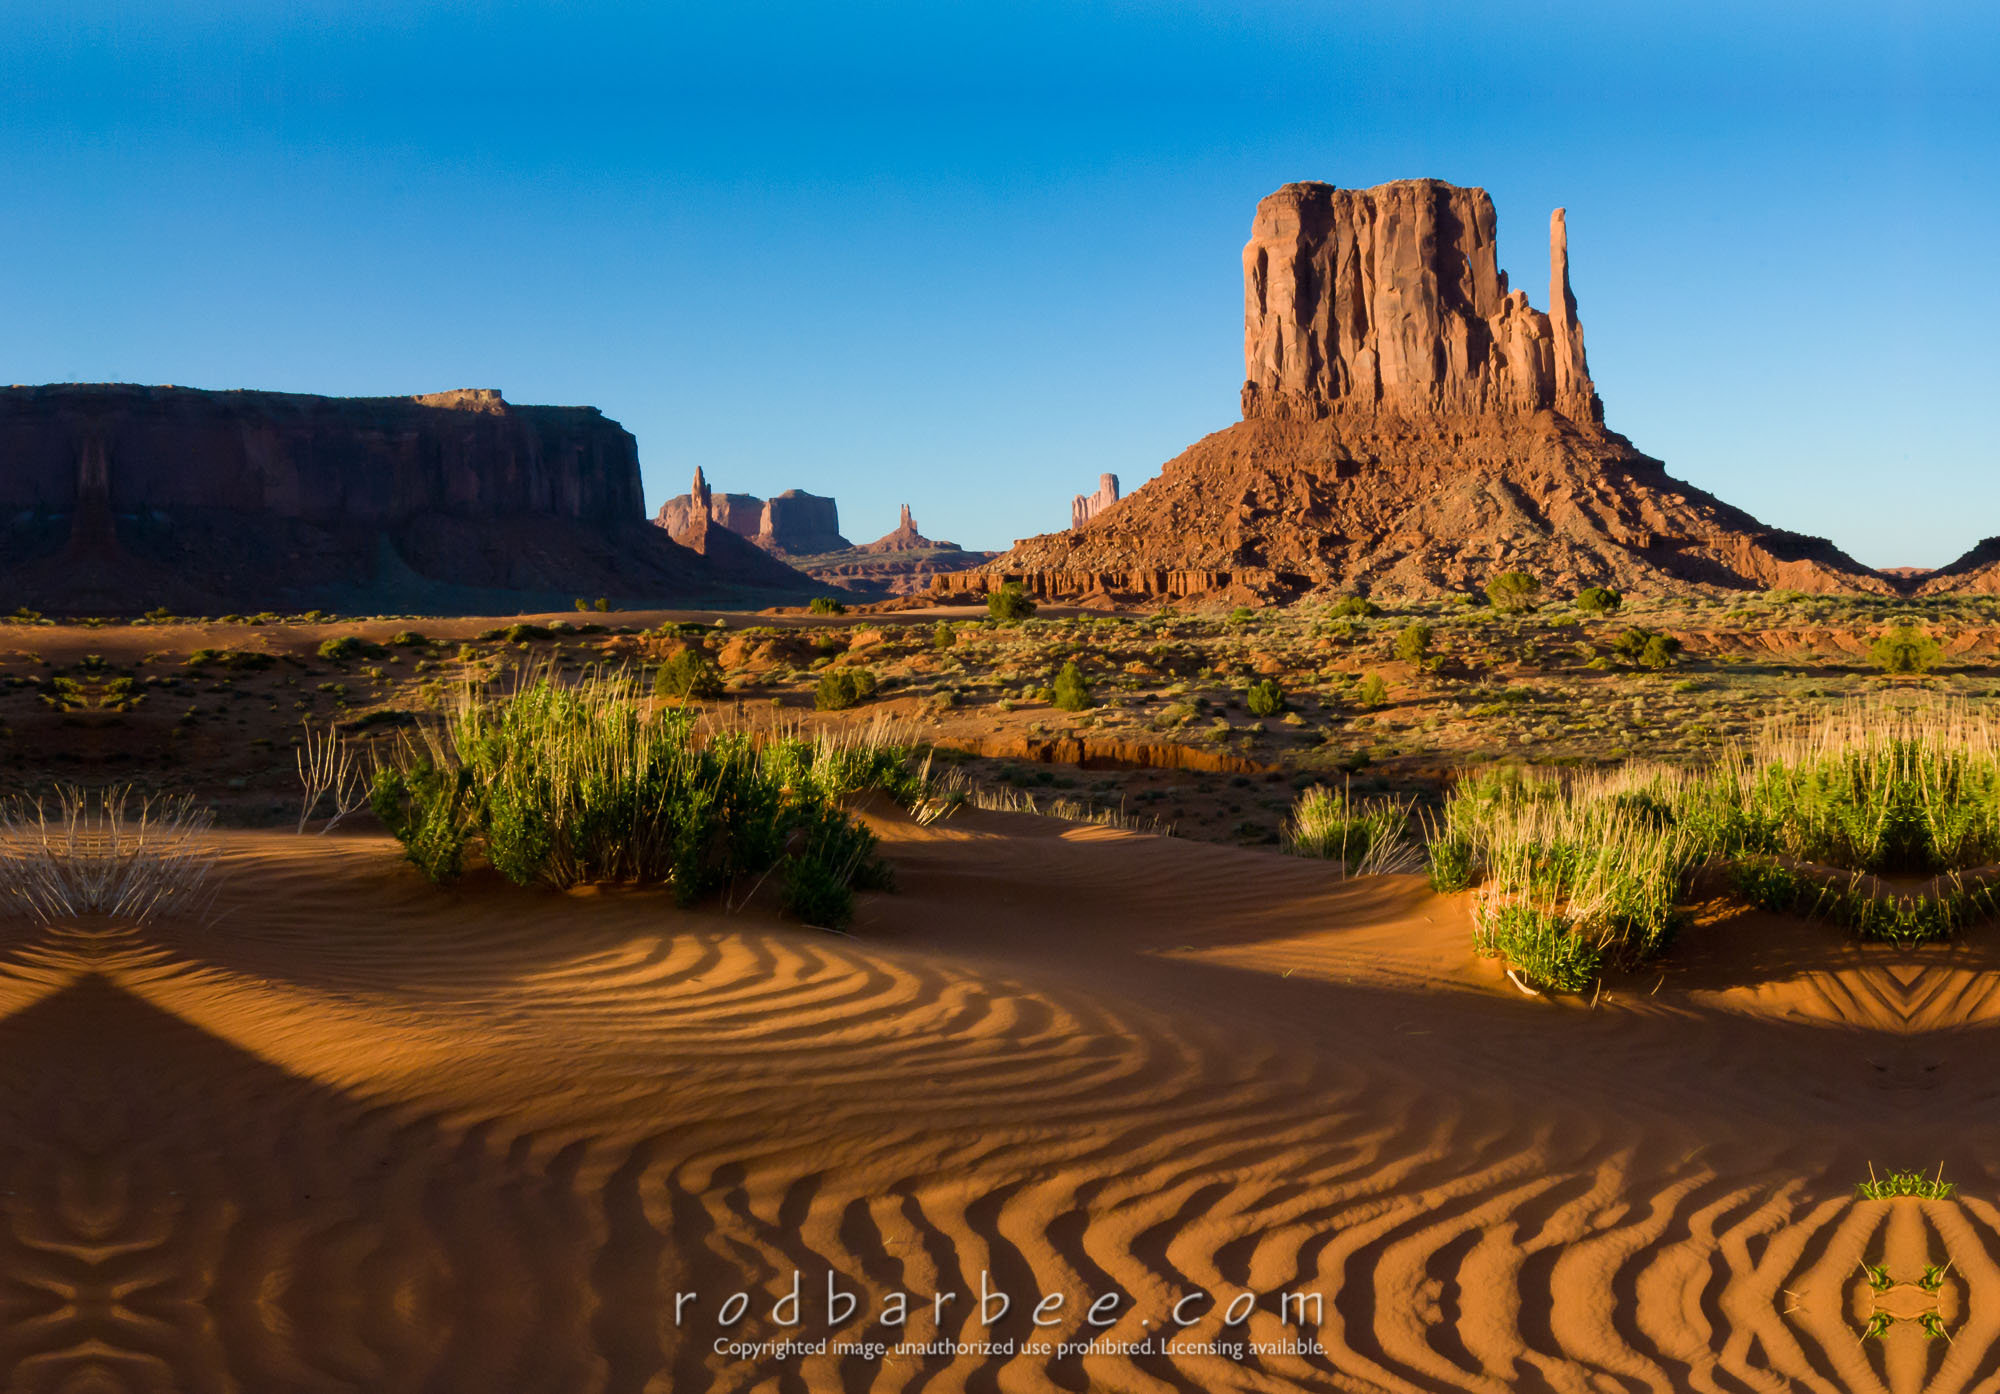 Barbee_070413_2_6275_20x30_gwm |  The North Mitten near sunset, Monument Valley